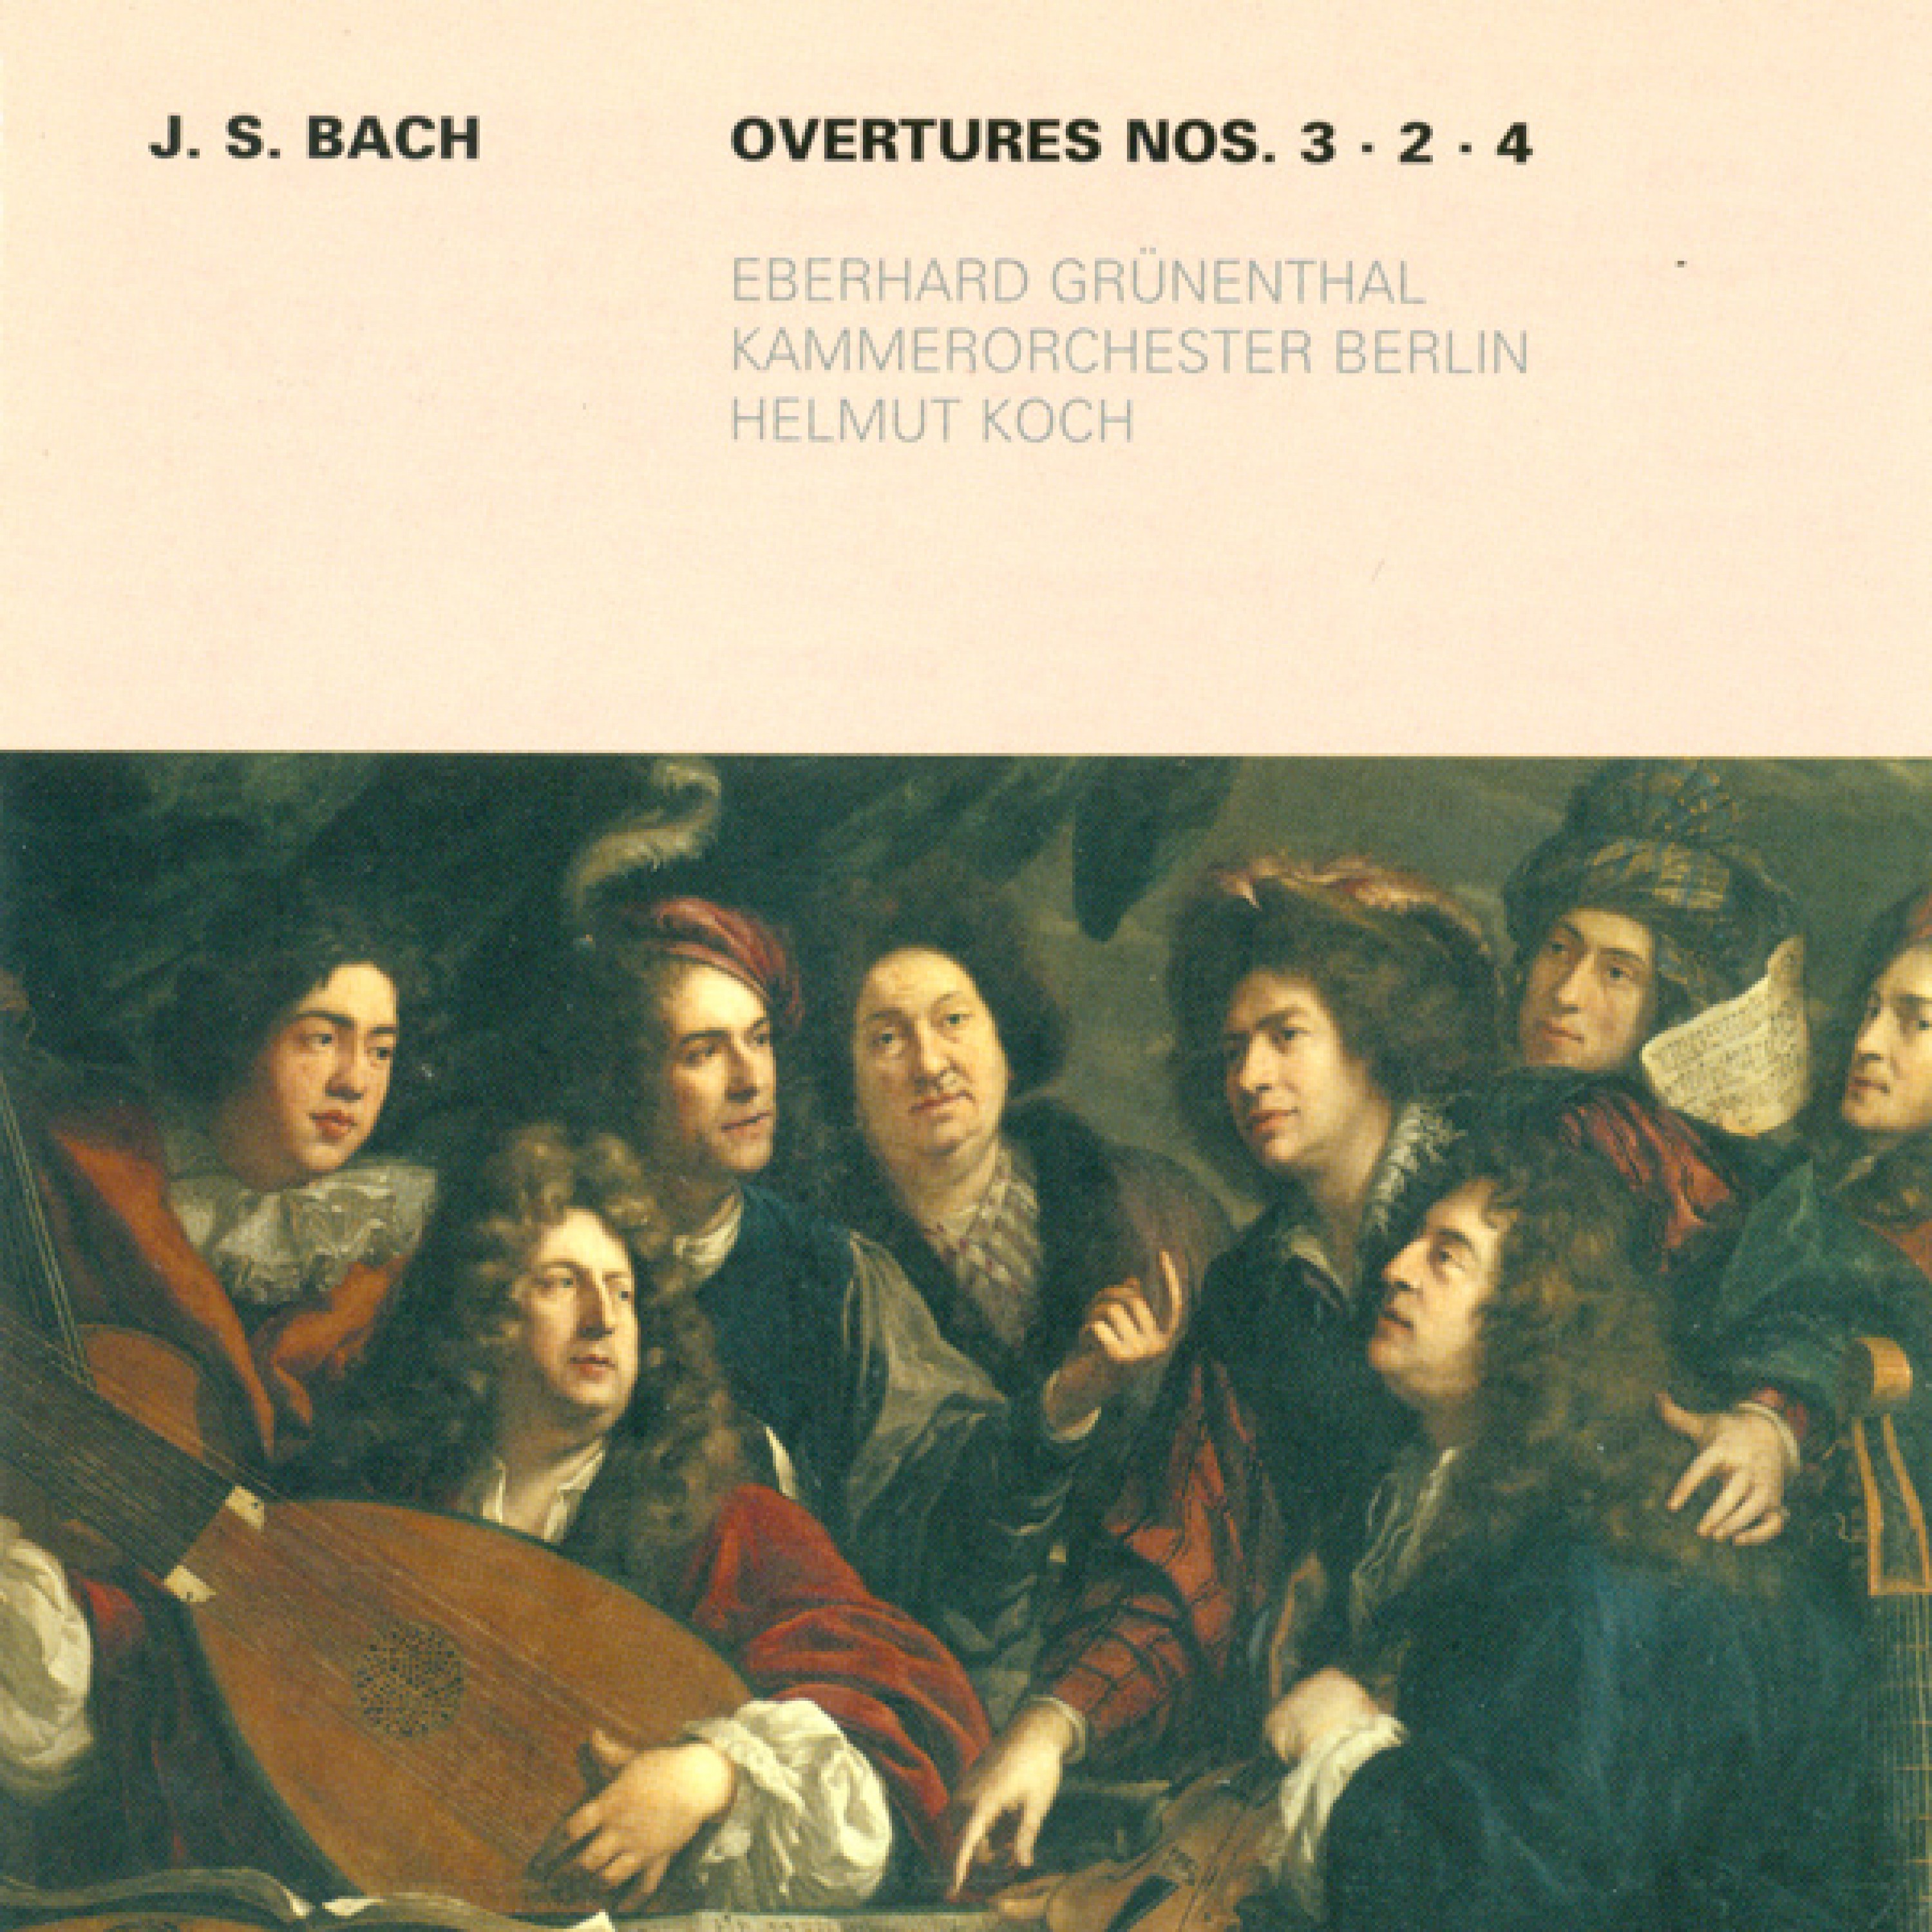 Suite for Orchestra No. 3 in D Major, BWV 1068: II. Air